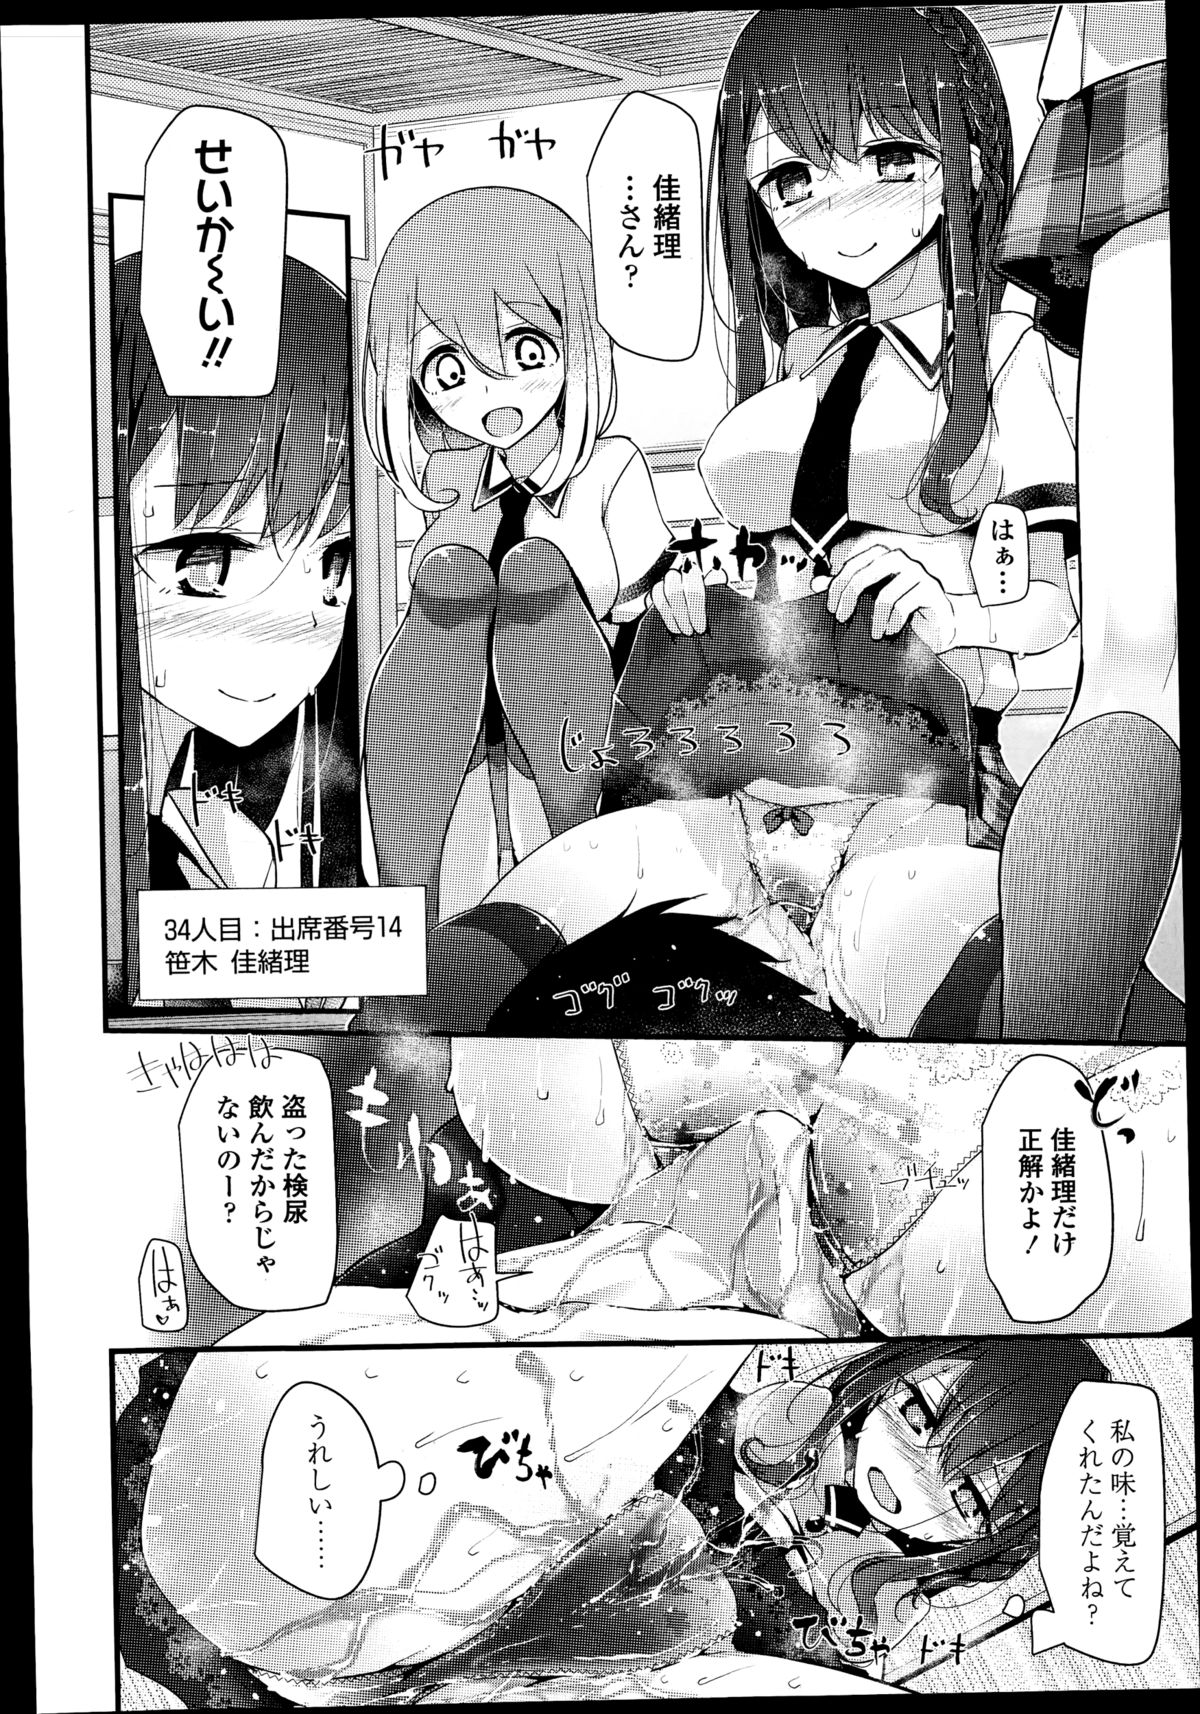 Girls forM Vol. 08 page 42 full